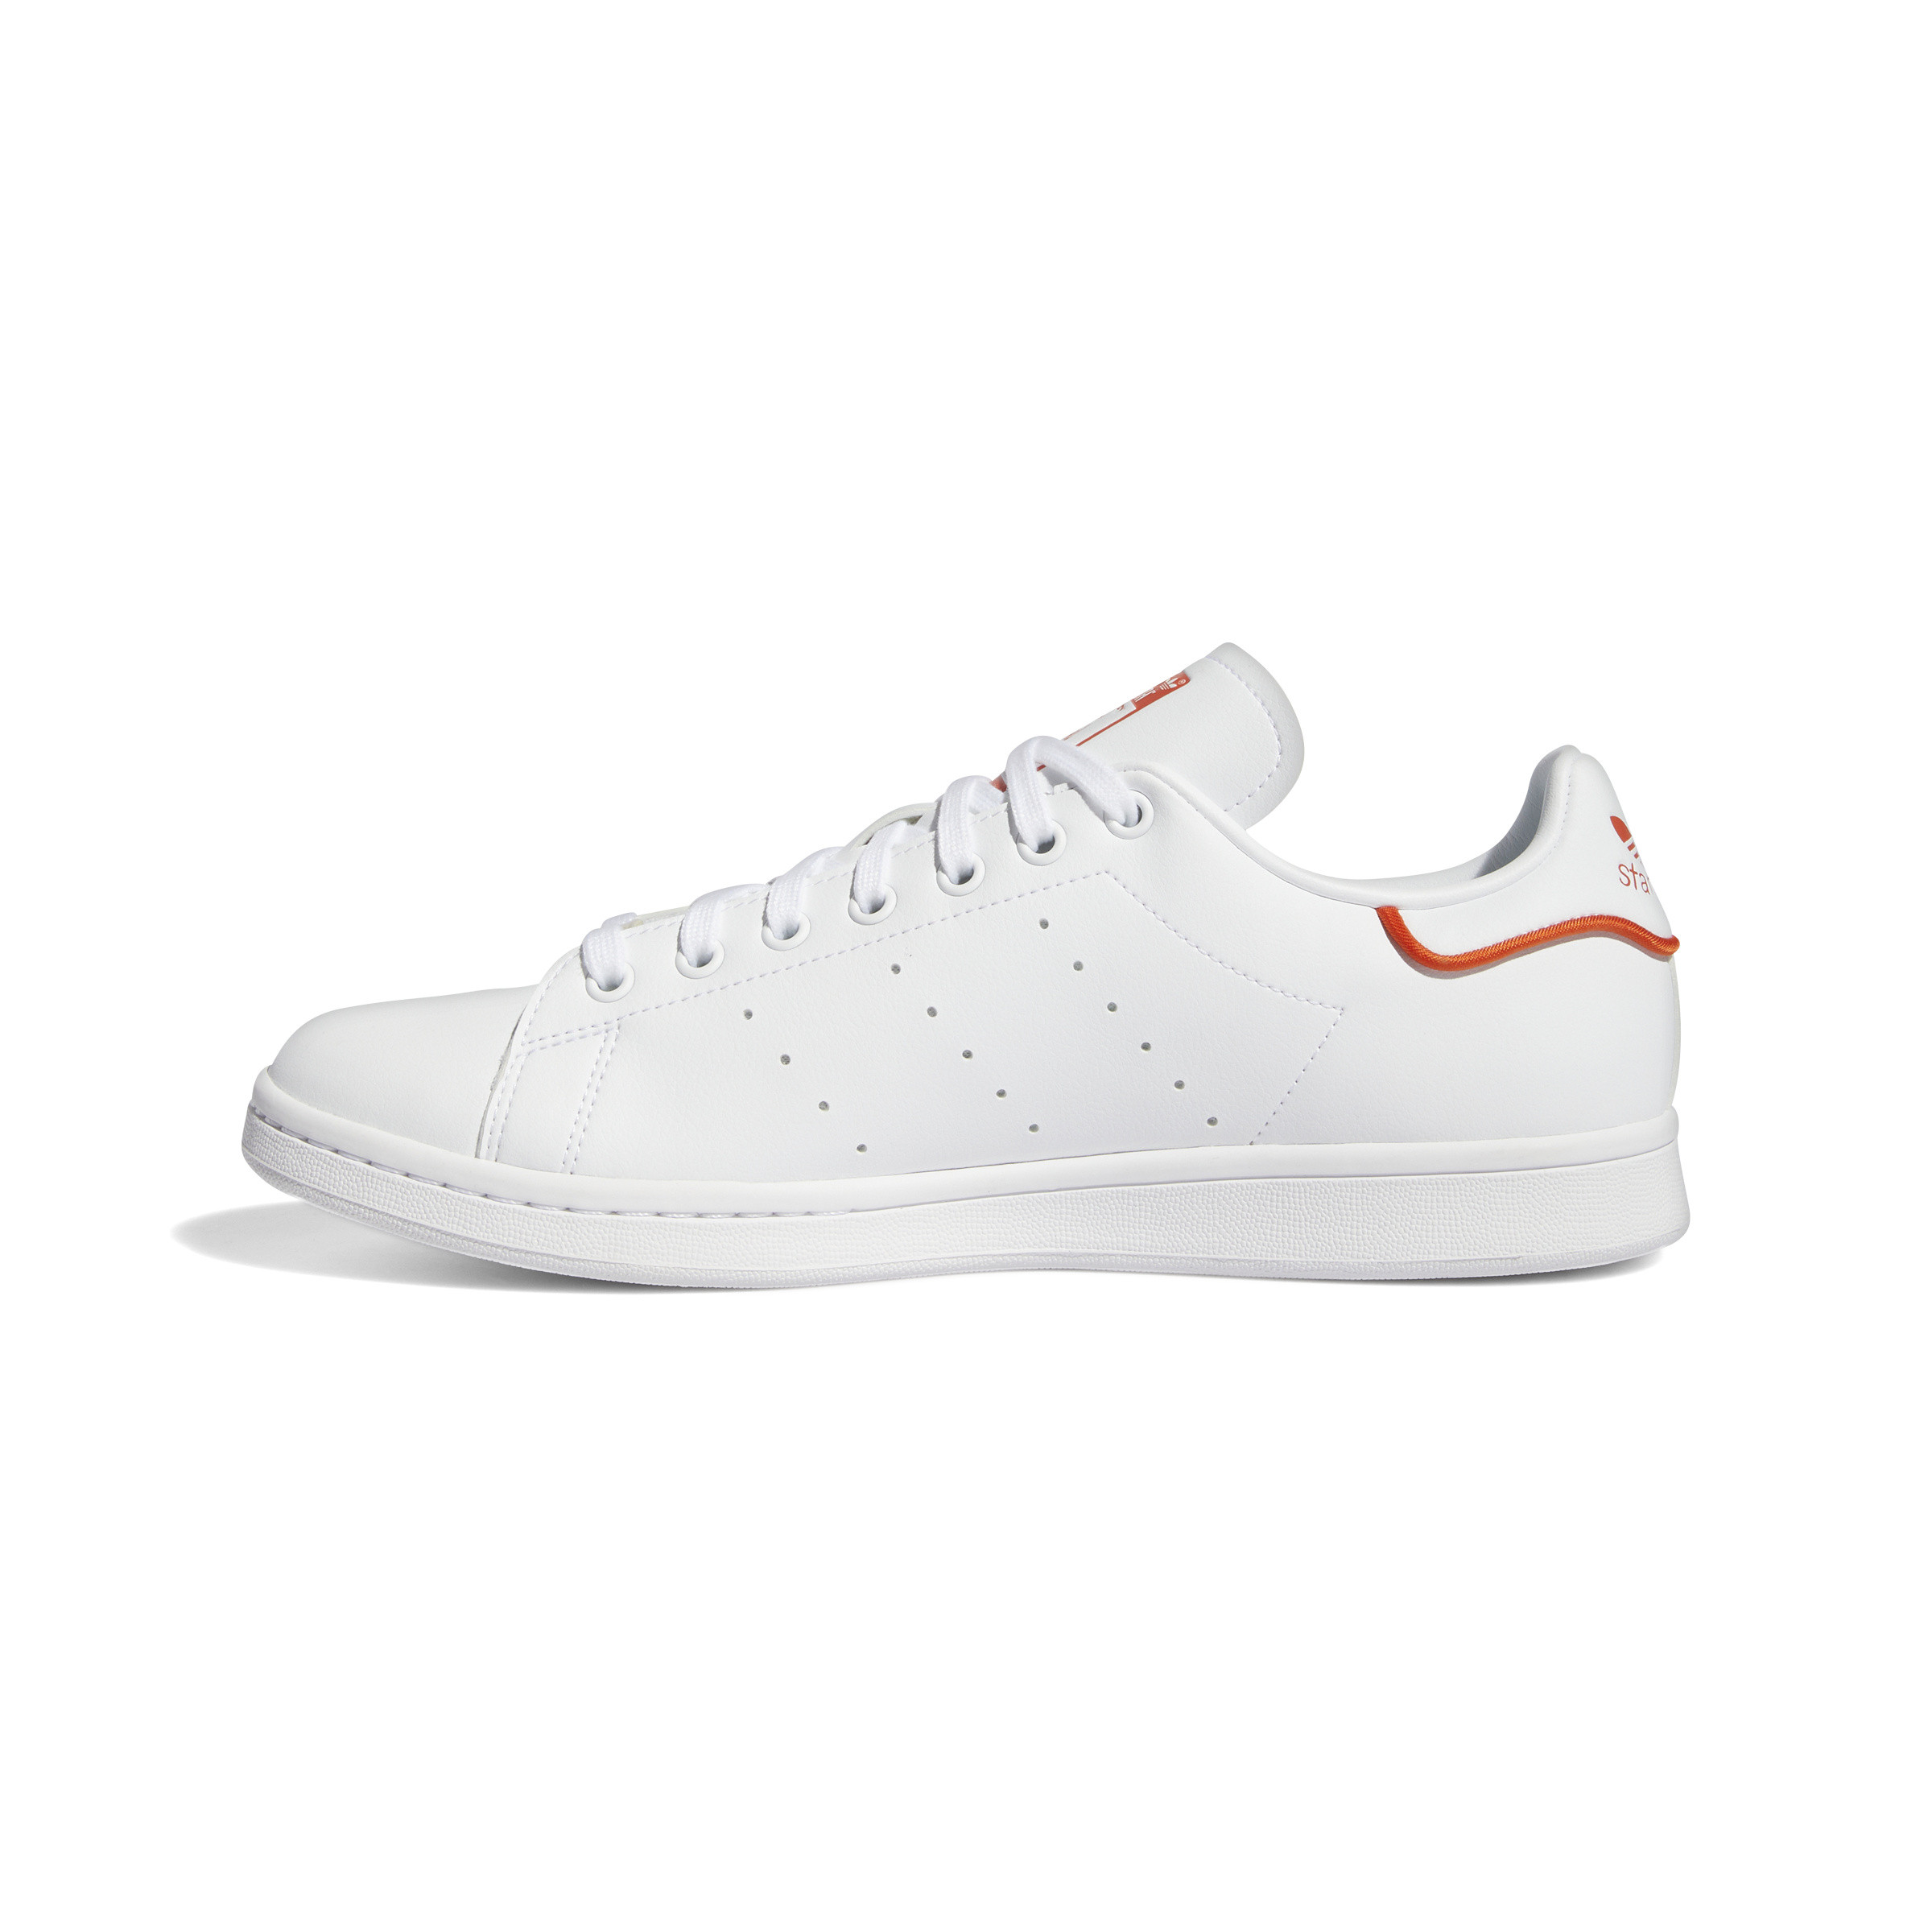 Stan Smith Shoes, White, large image number 3